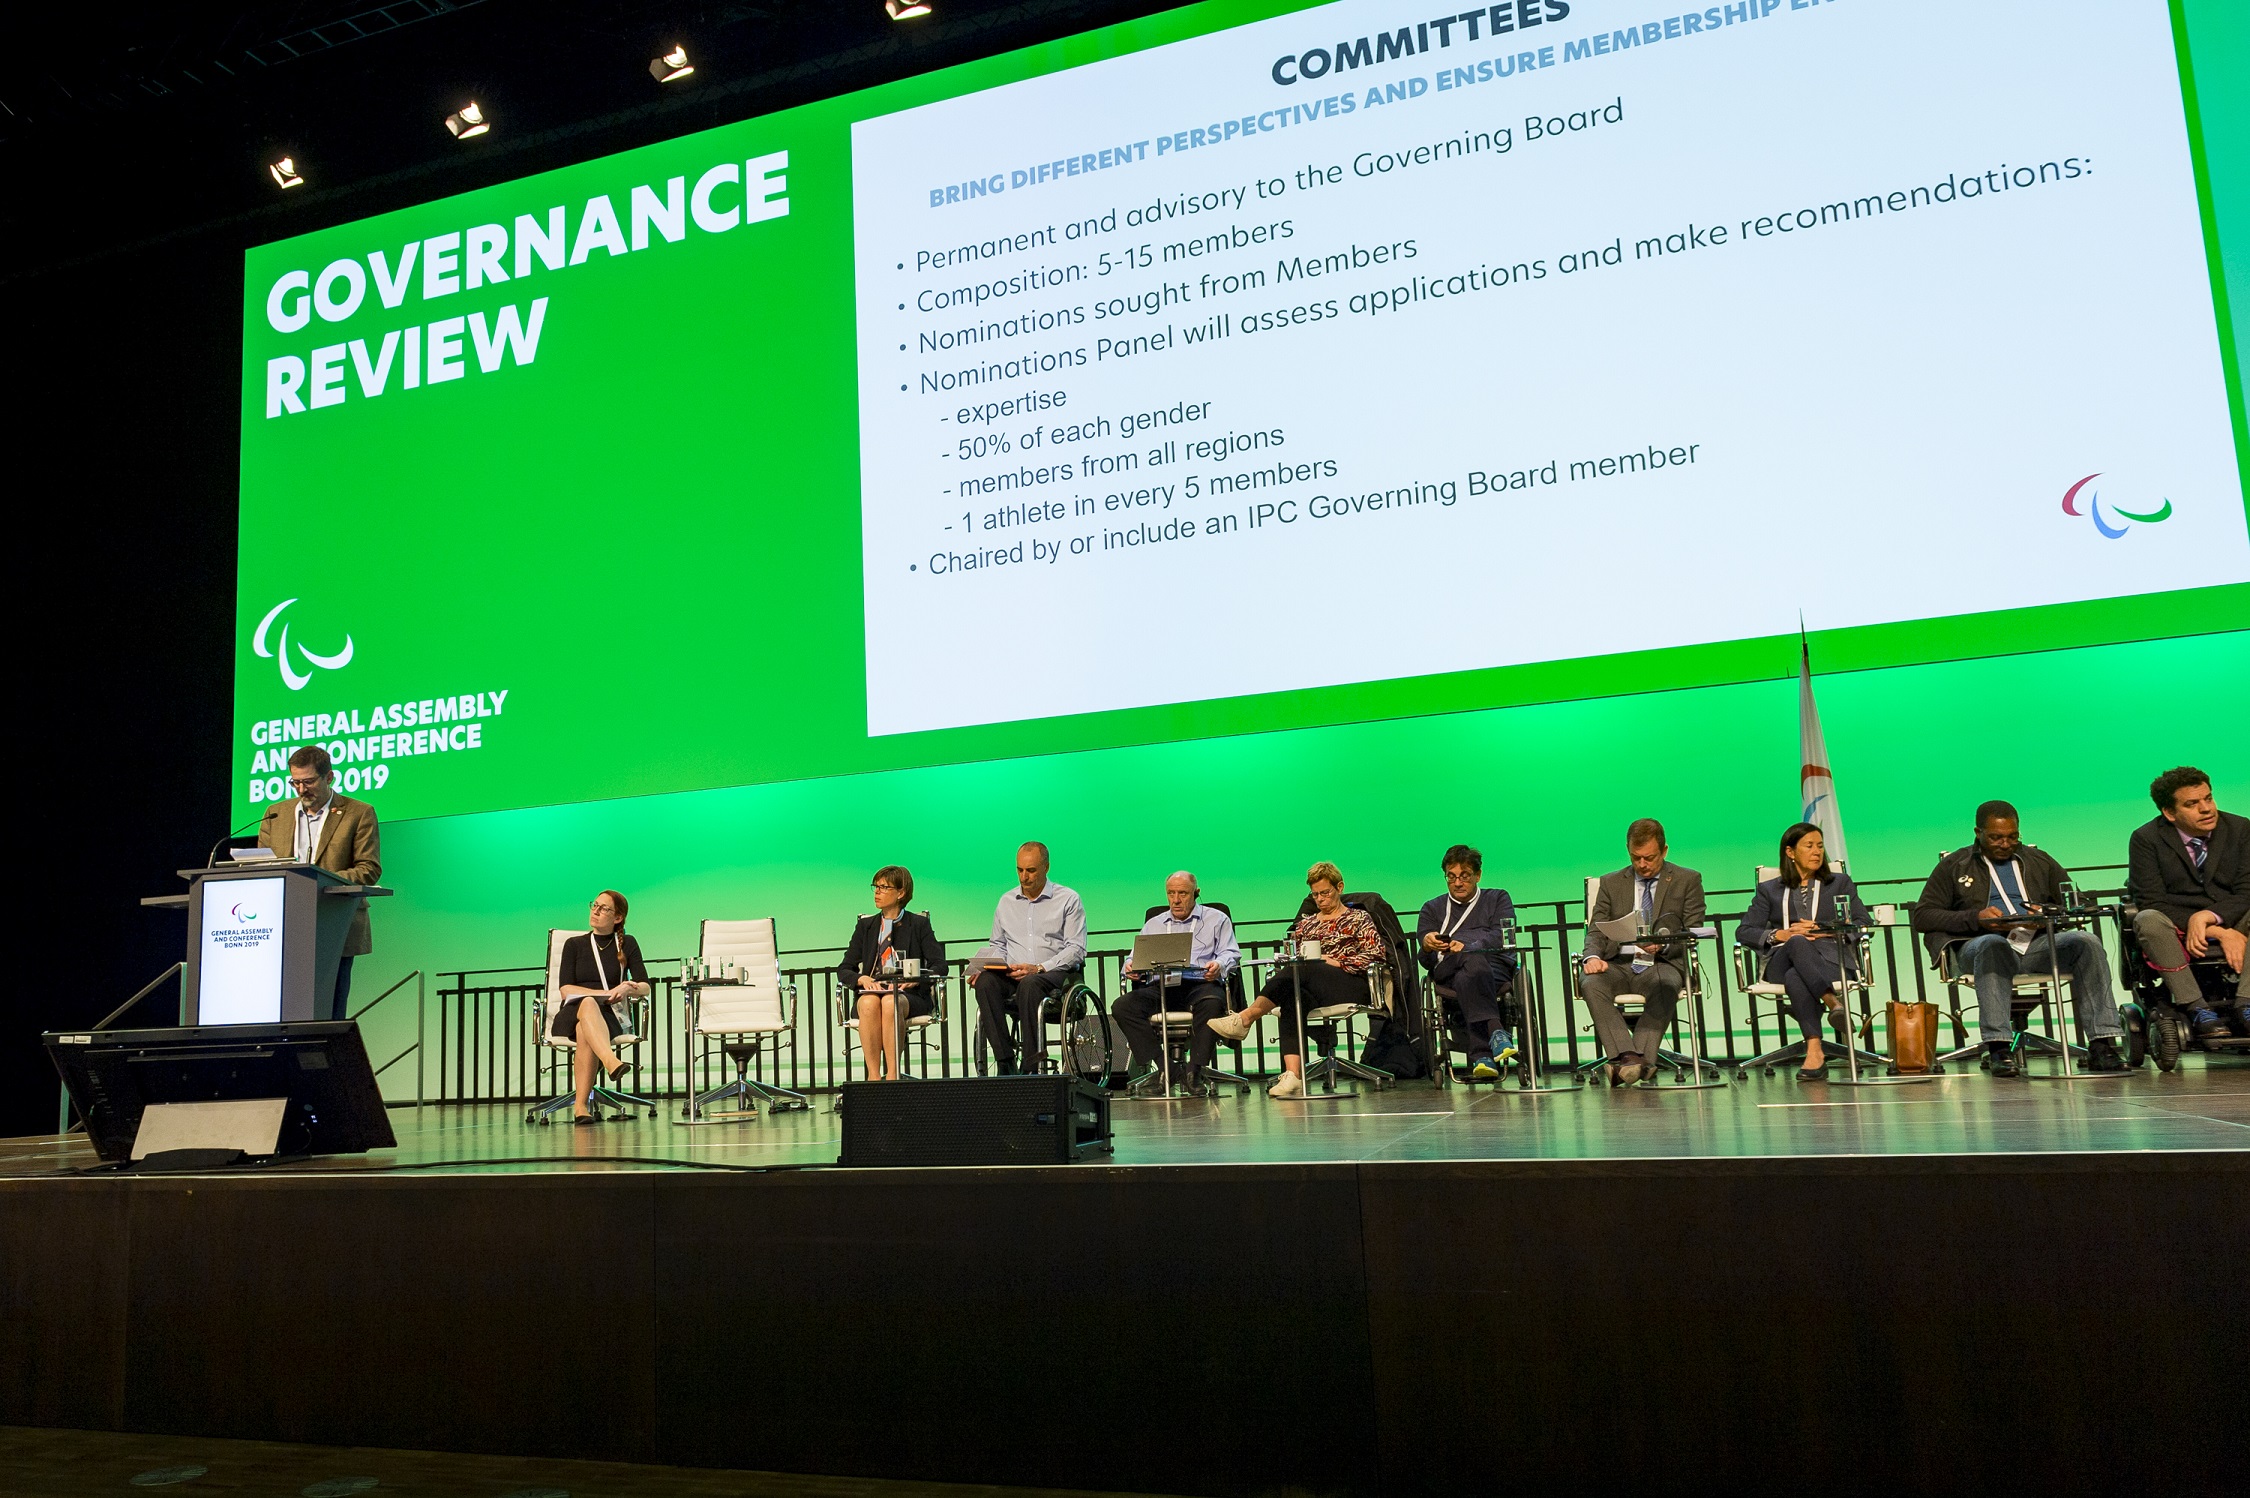 Governance Review